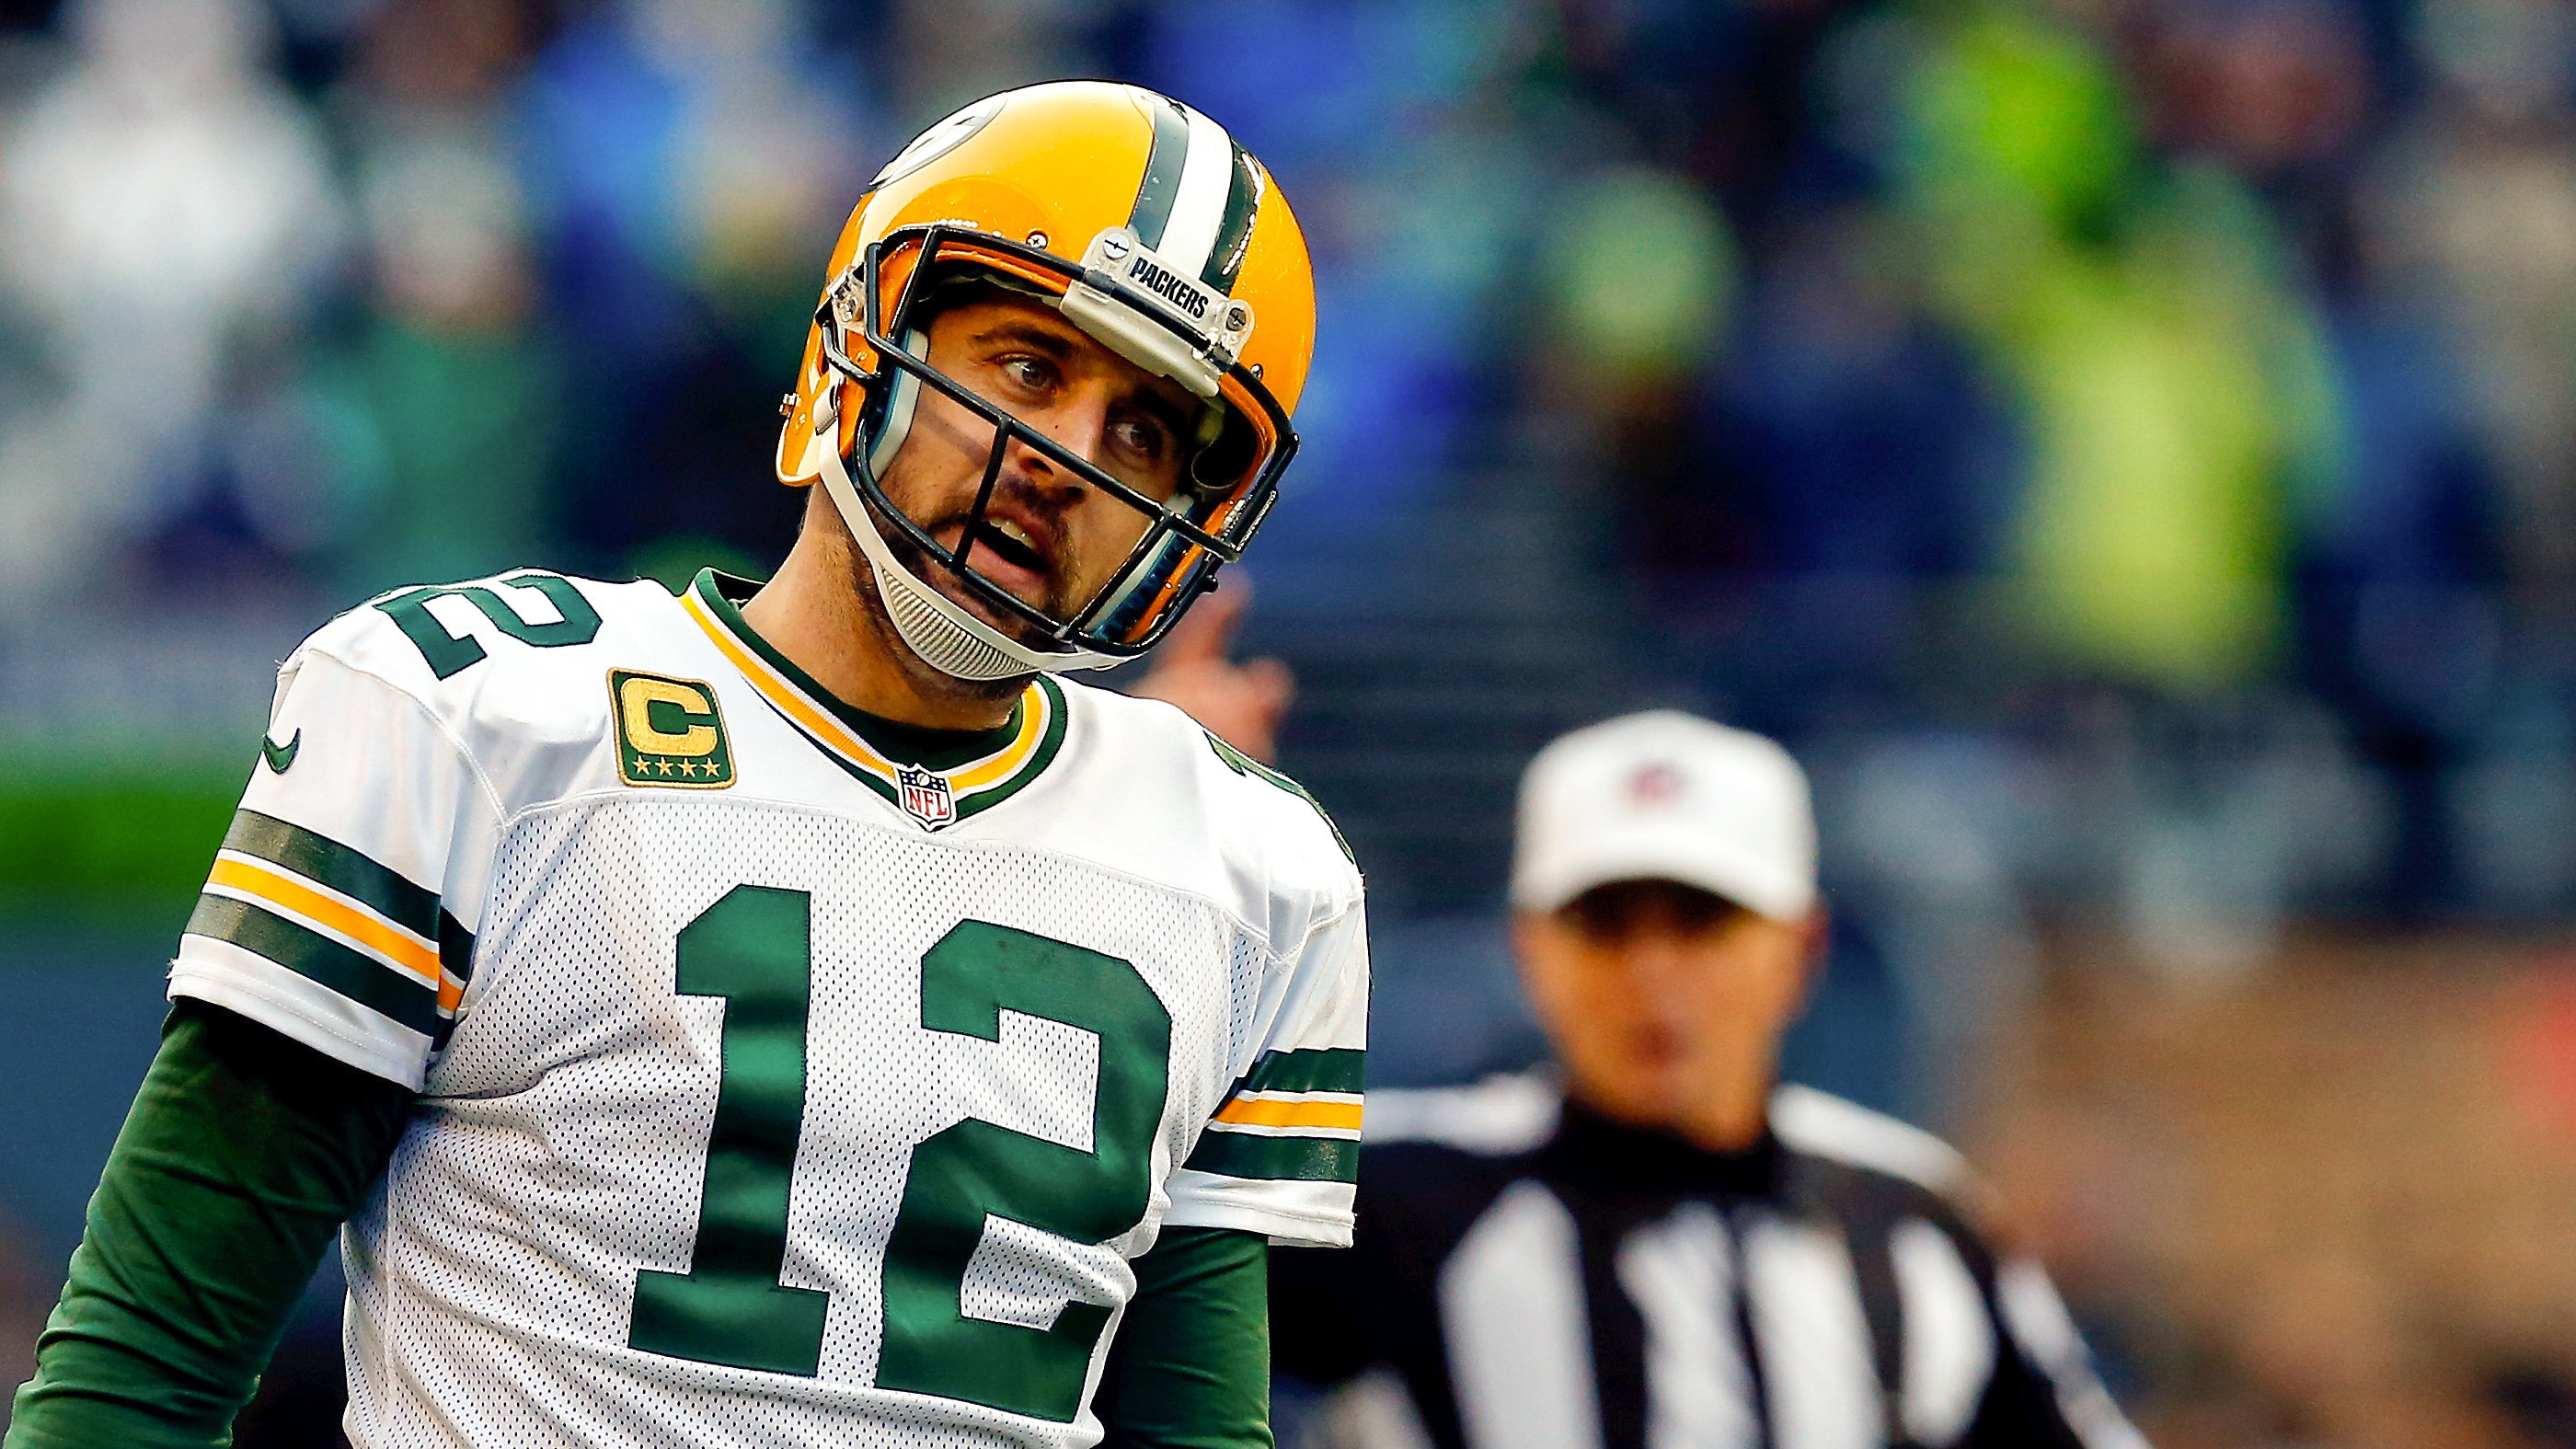 Packers' Aaron Rodgers Complains About Refs in Vikings Loss